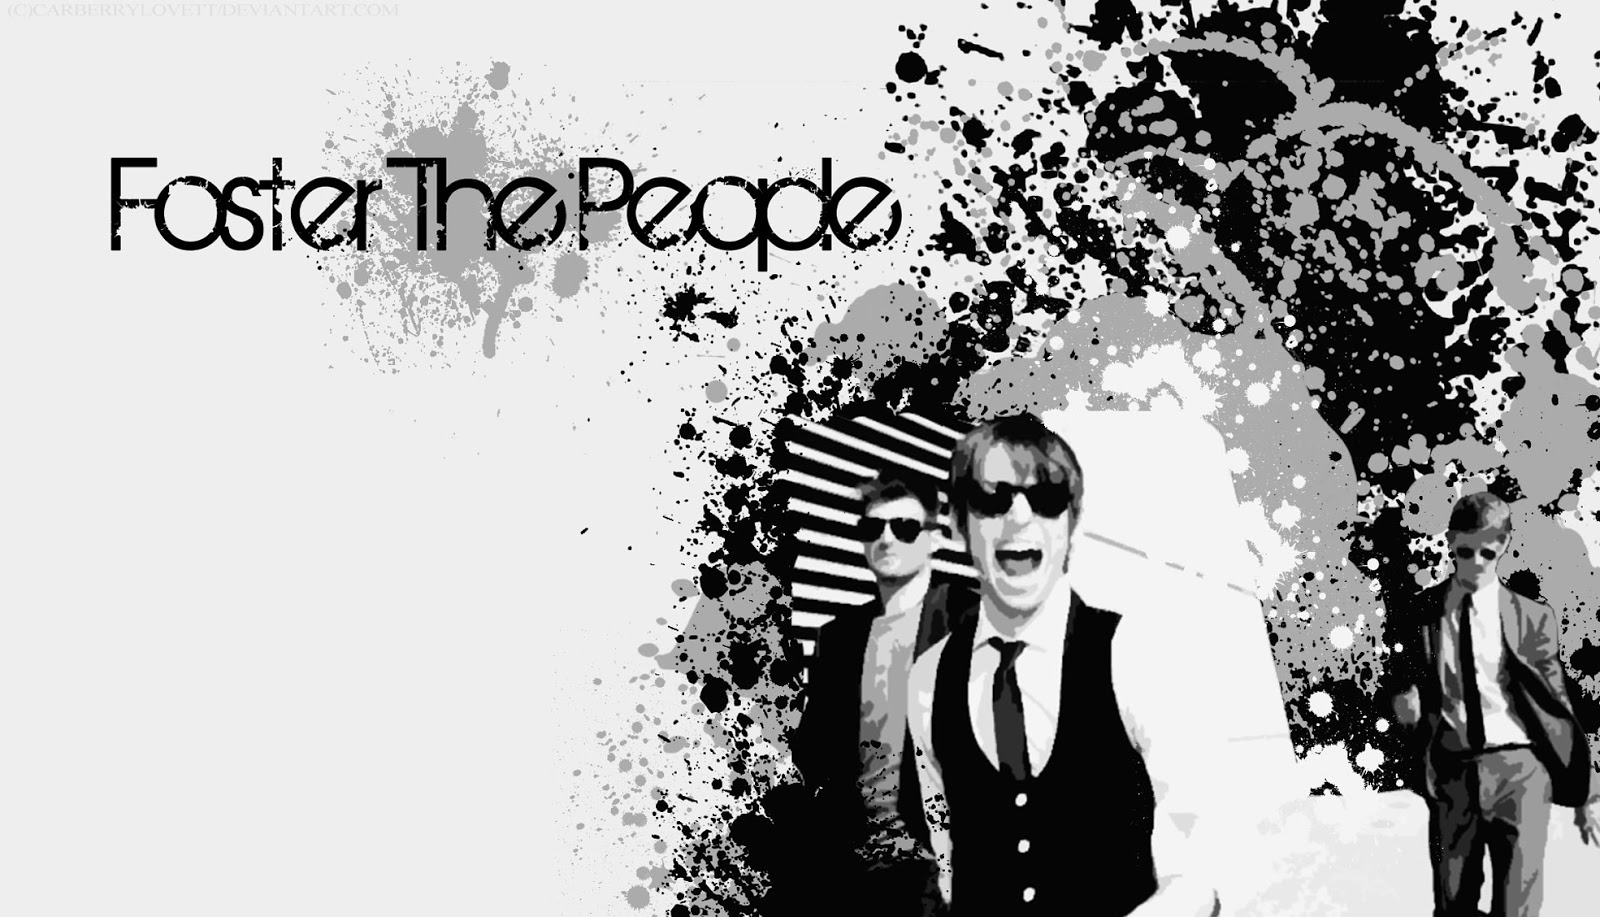 Foster The People Wallpaper Pictures